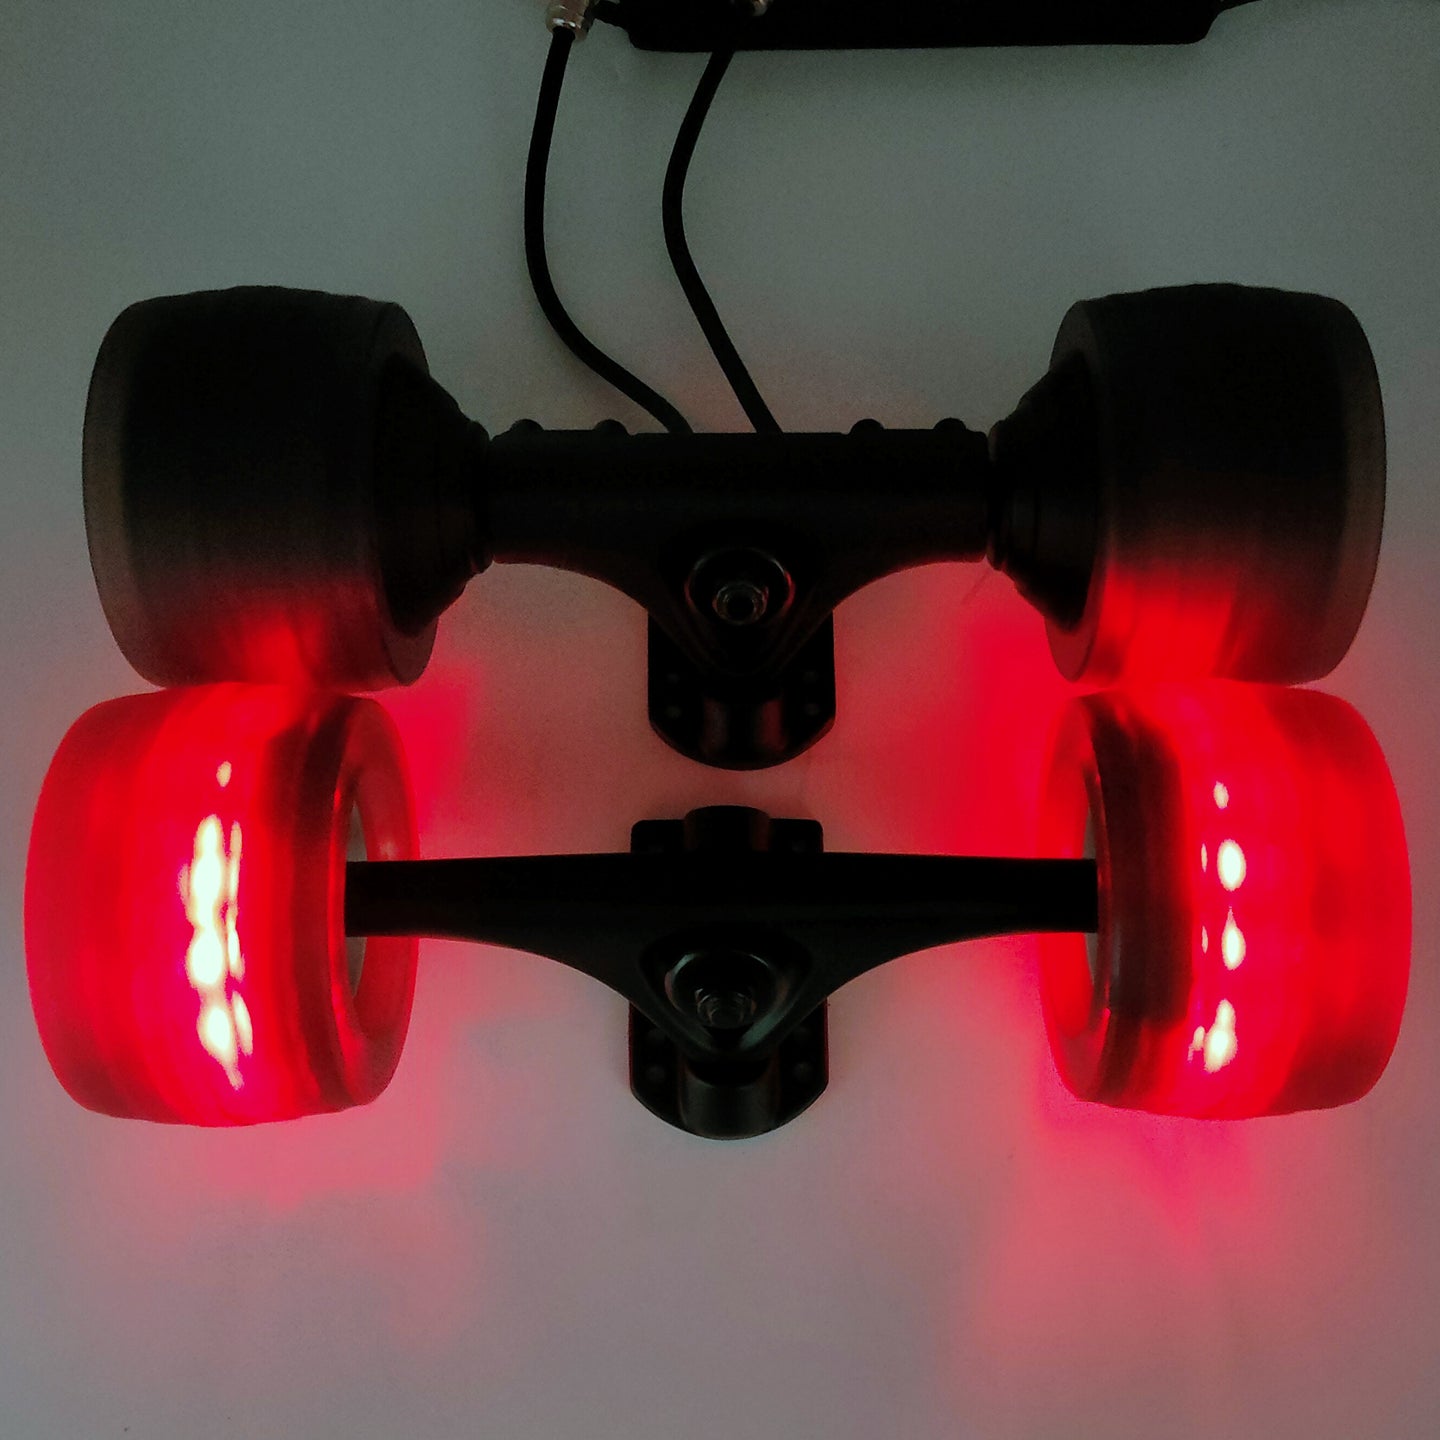 Illuminate Your DIY Skateboard: Puaida 36V Dual Hub Motor Kit with Glow Wheels - Transform your electric skateboard project with this kit featuring dual hub motors and vibrant glow wheels. Enjoy a customized ride with enhanced visibility and style.